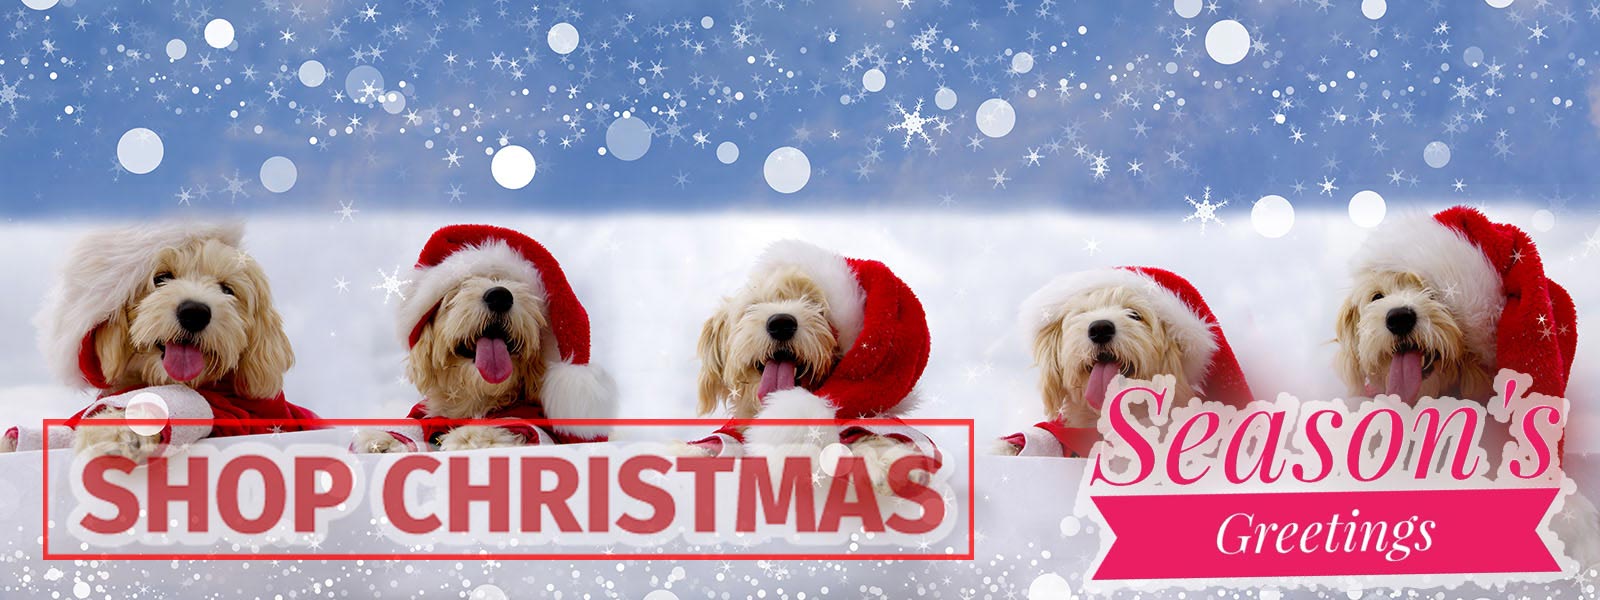 Dog Krazy Gifts - Christmas Collection, all the best dog themed gifts for dog lovers